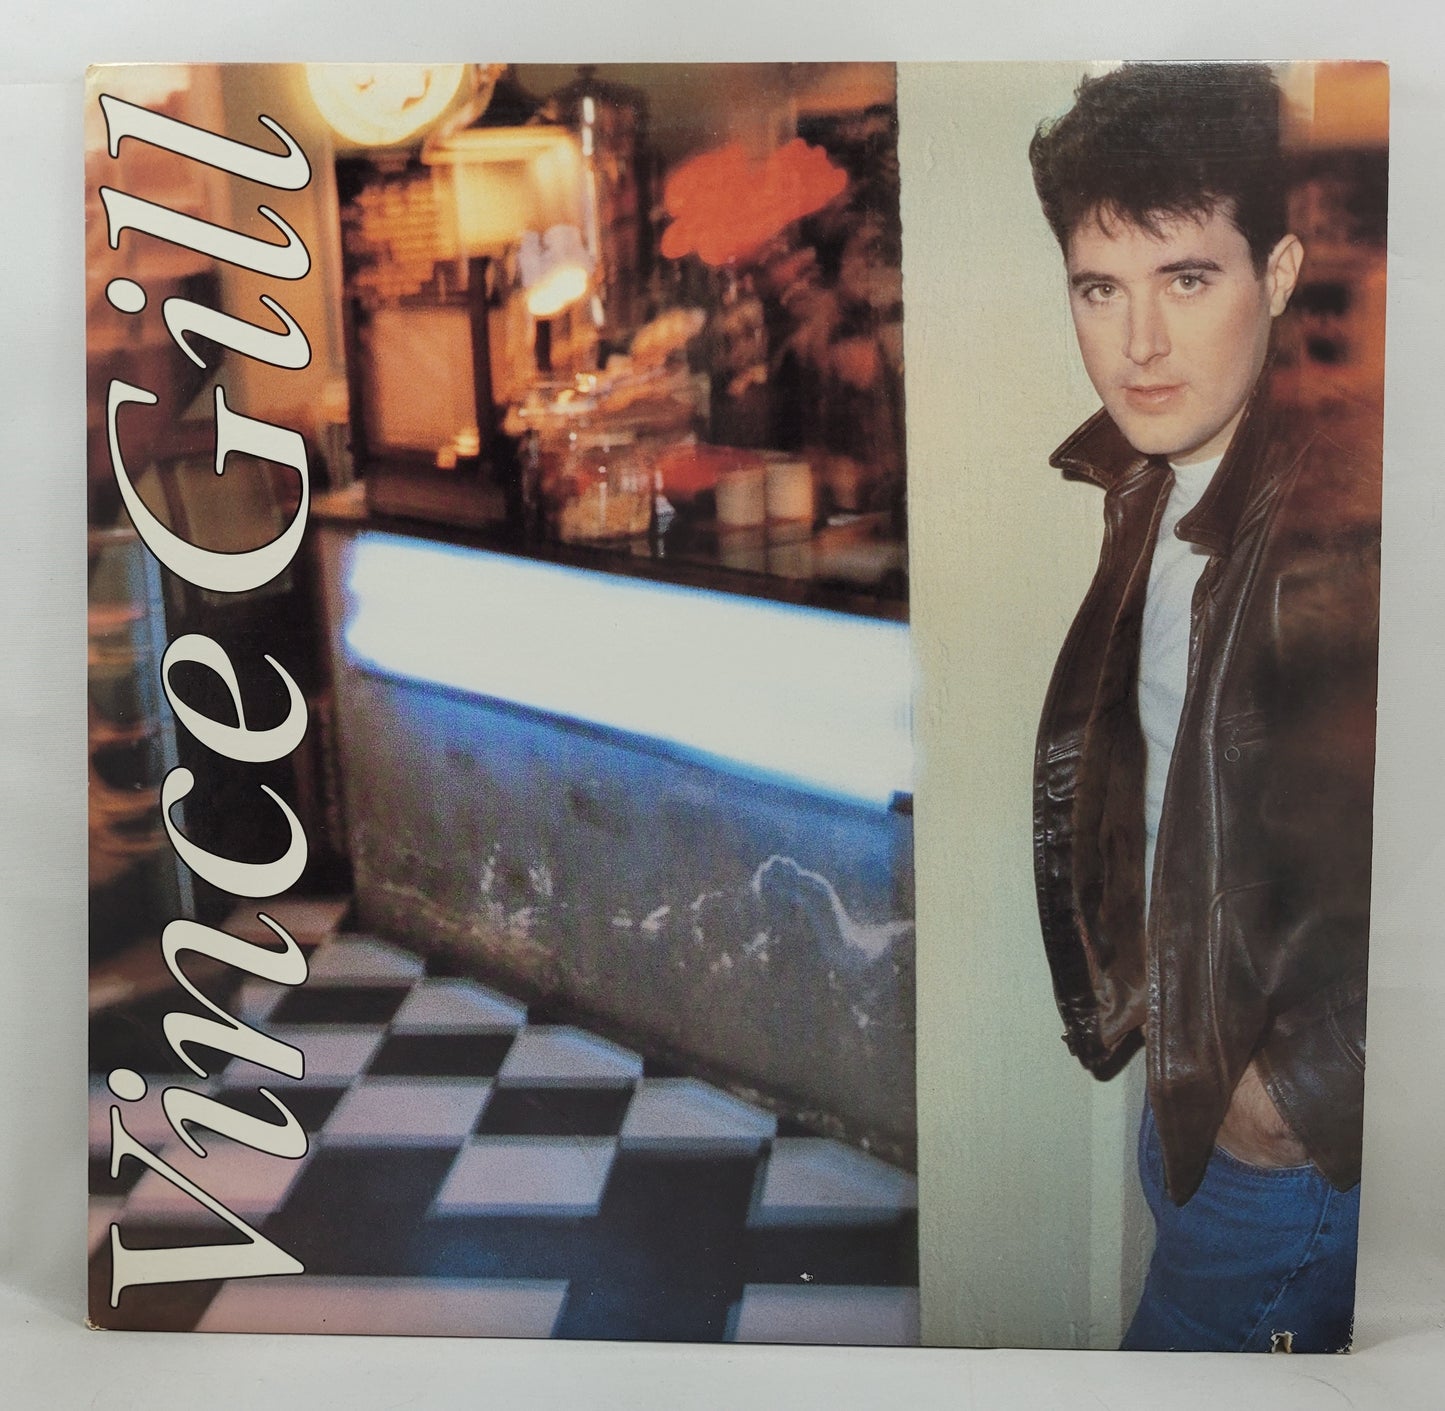 Vince Gill - The Things That Matter [Vinyl Record LP]